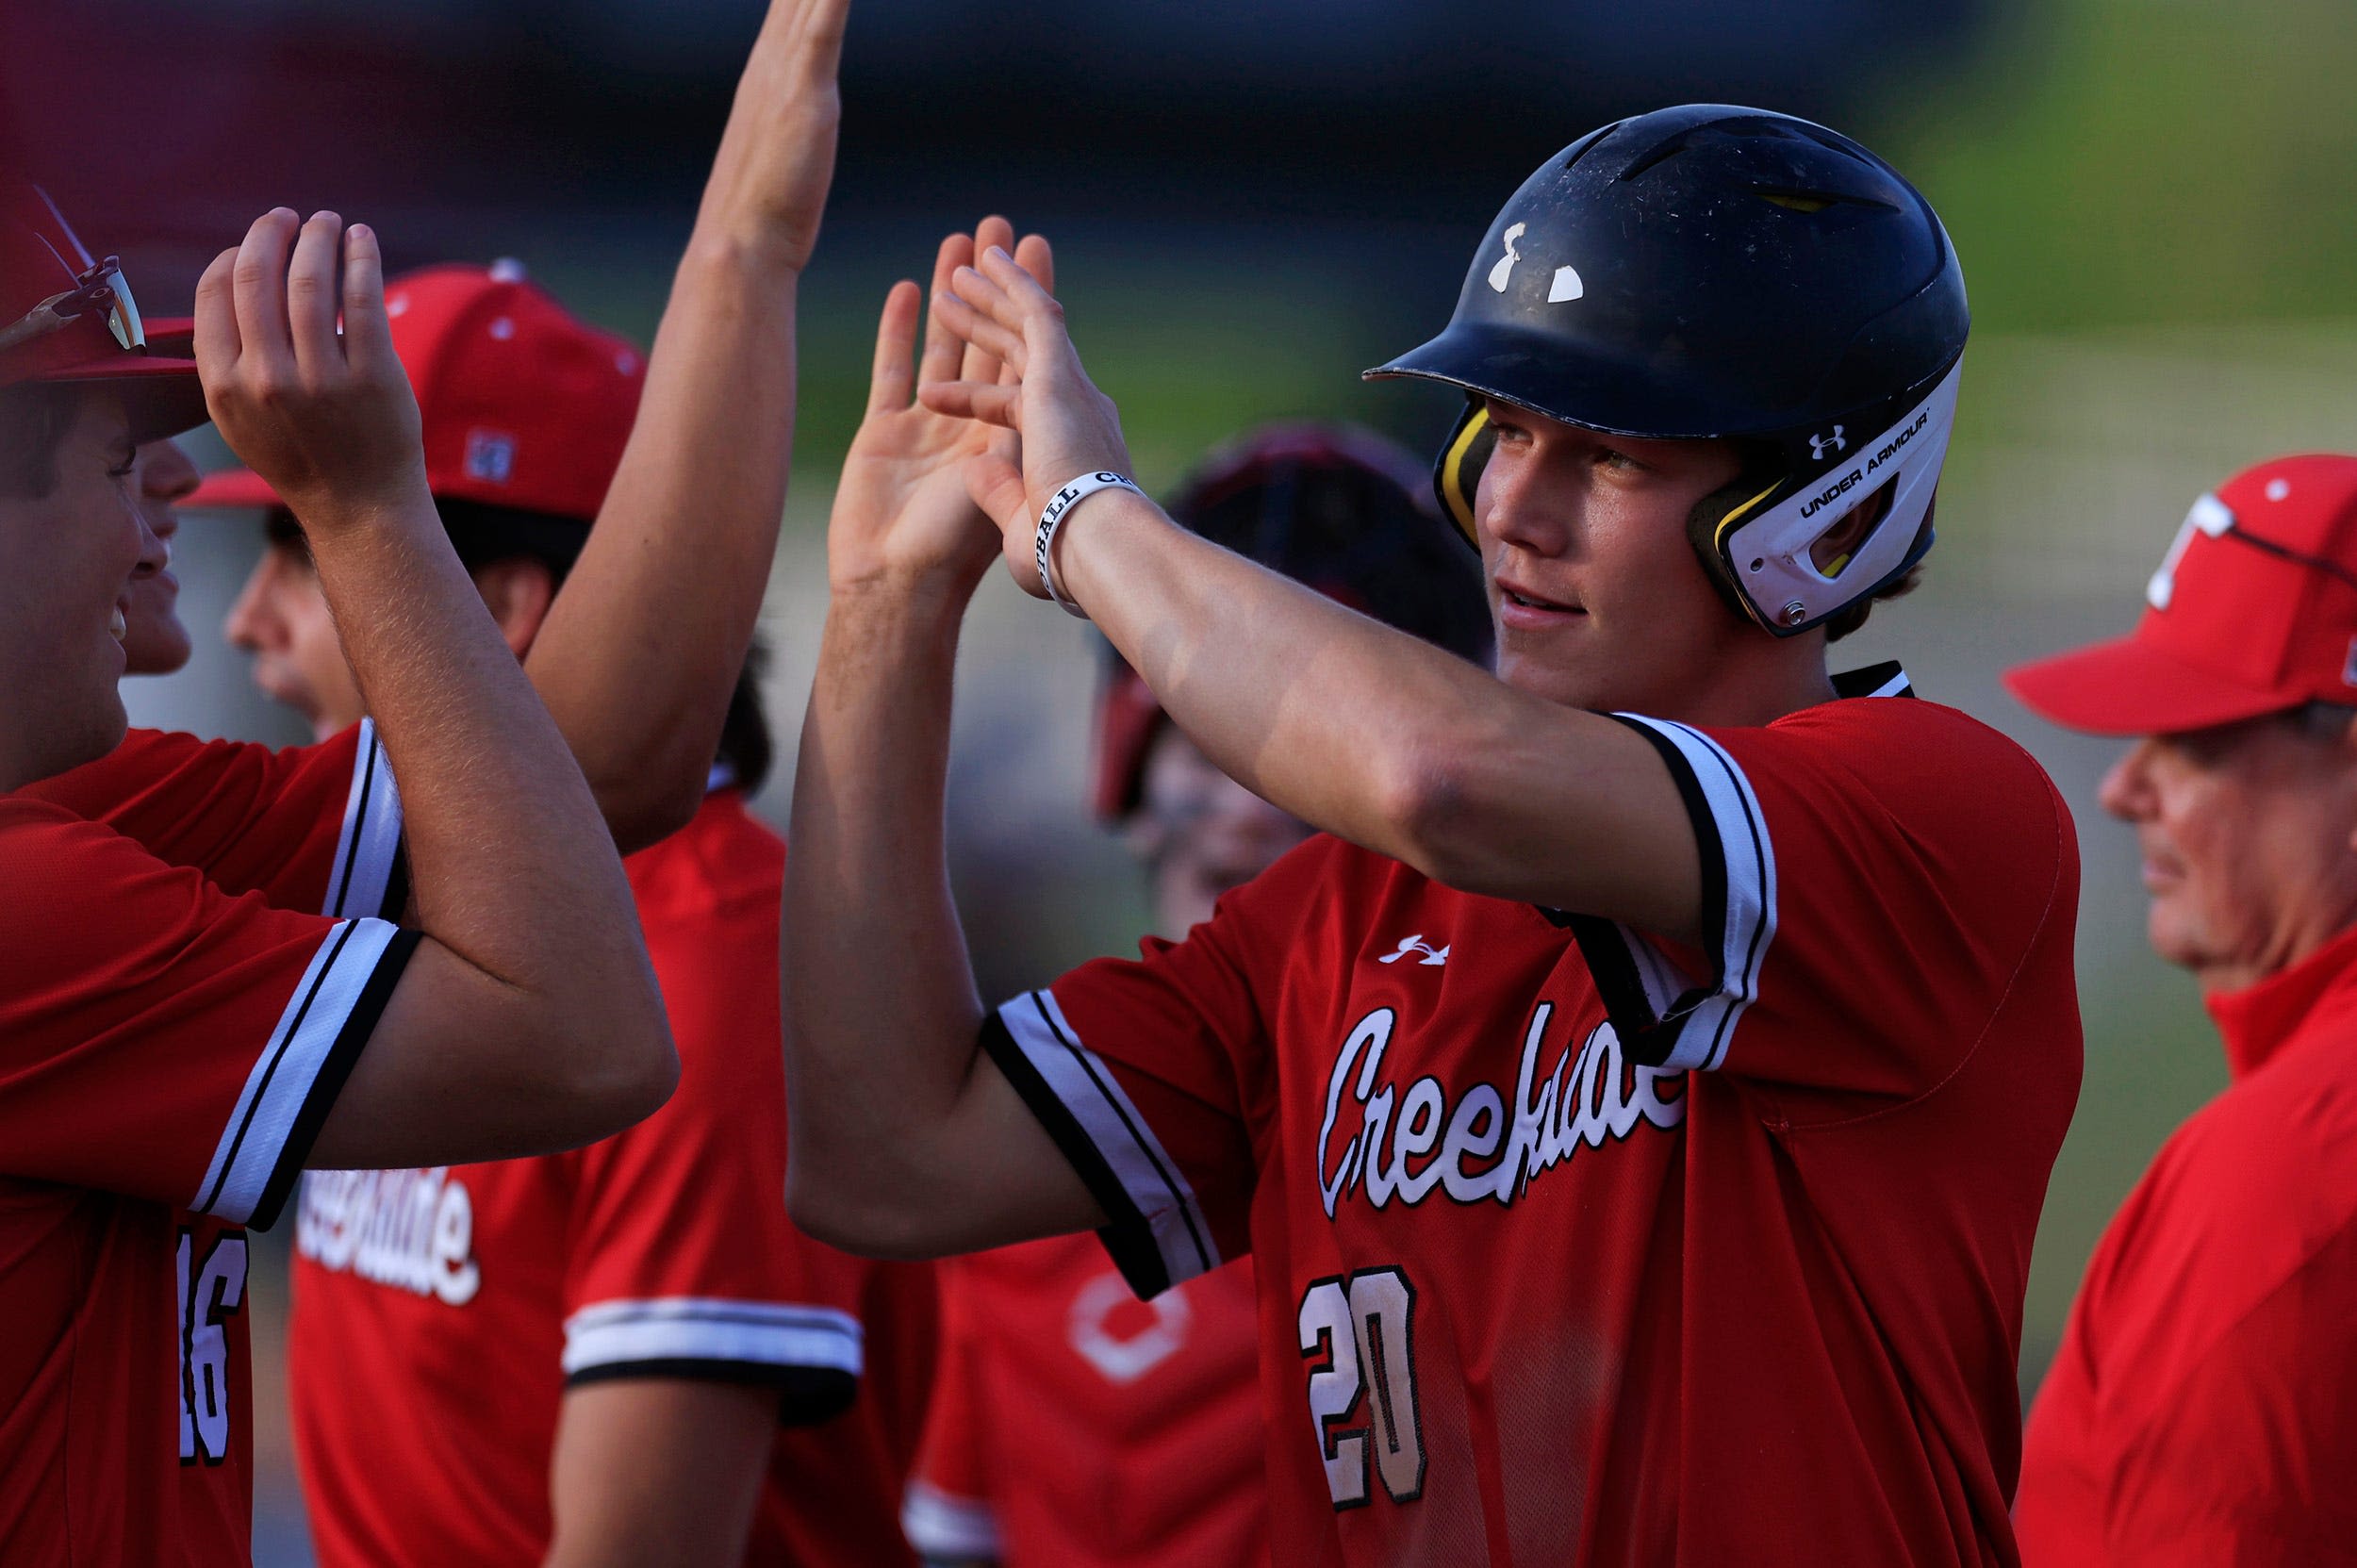 Playoff time: St. Johns County opens FHSAA baseball postseason with first round